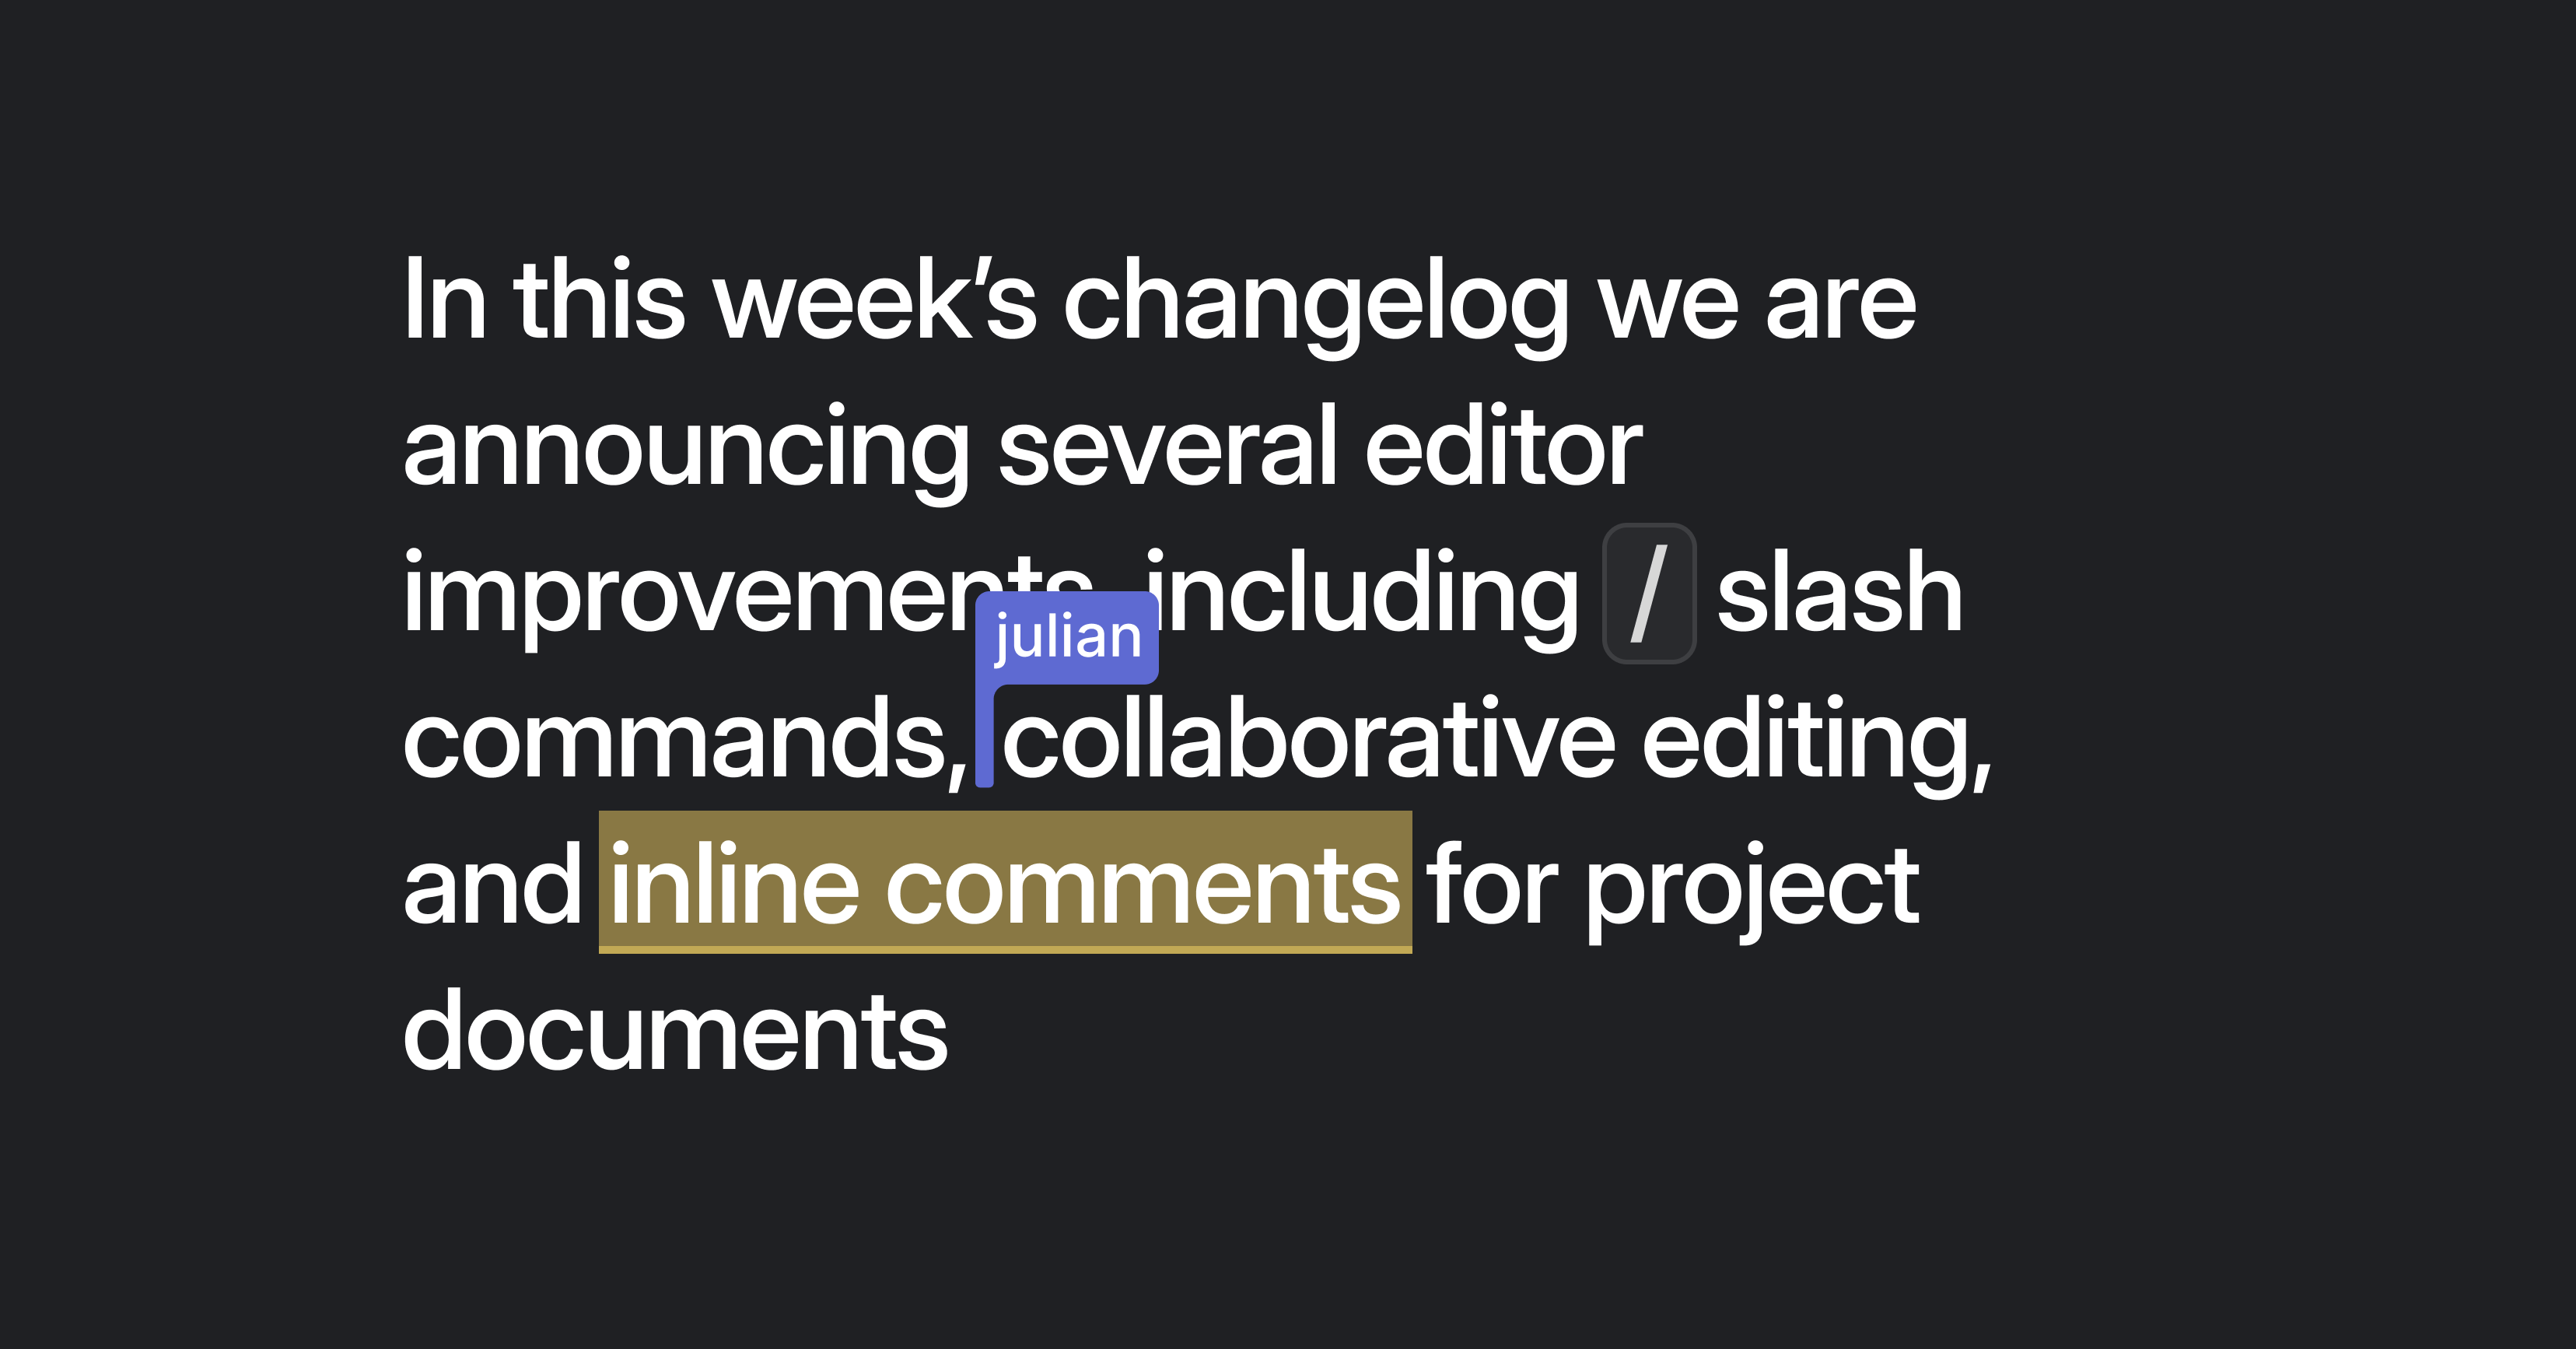 Text in an editor showing highlighted text indicating a comment as well as another user's cursor, indicating they are also viewing or editing the text